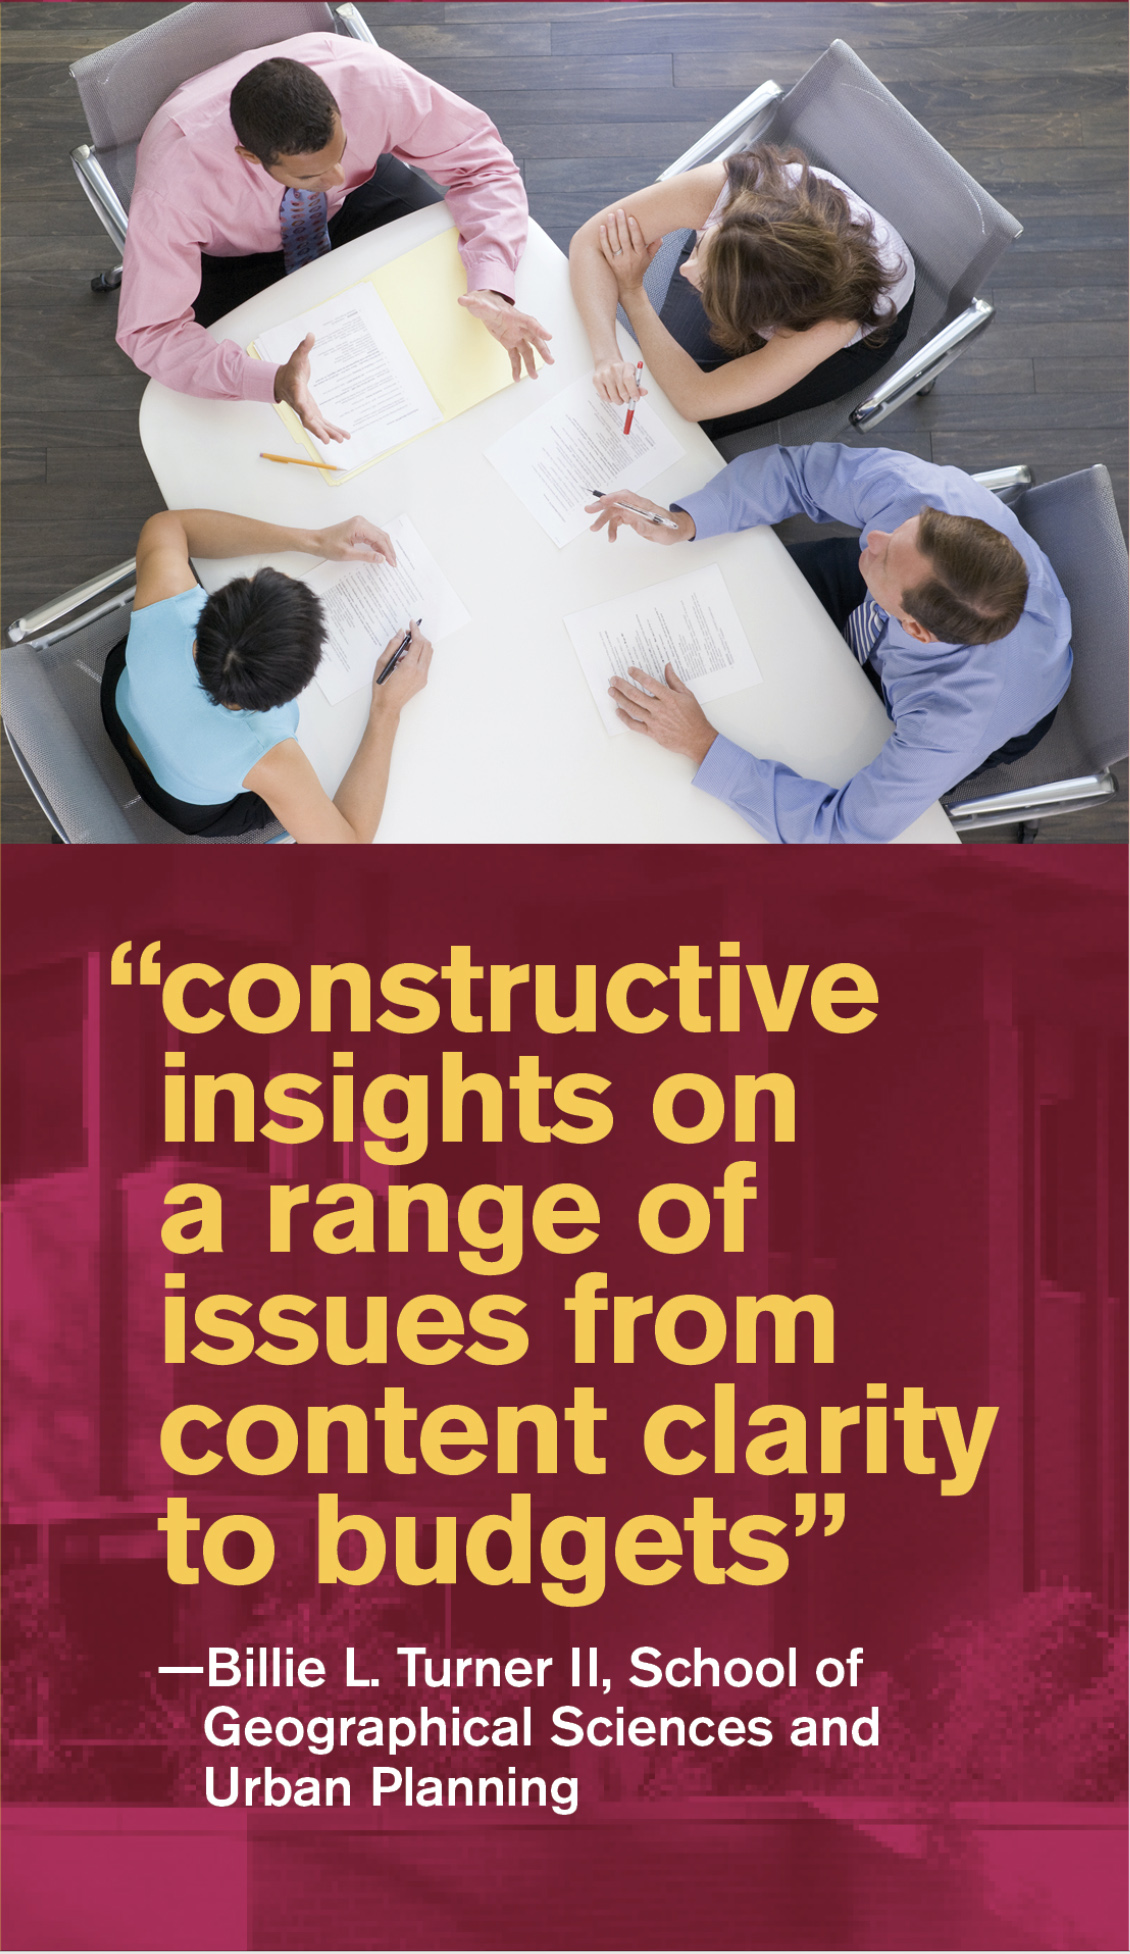 Constructive insights on a range of issues from a content clarity to budgets